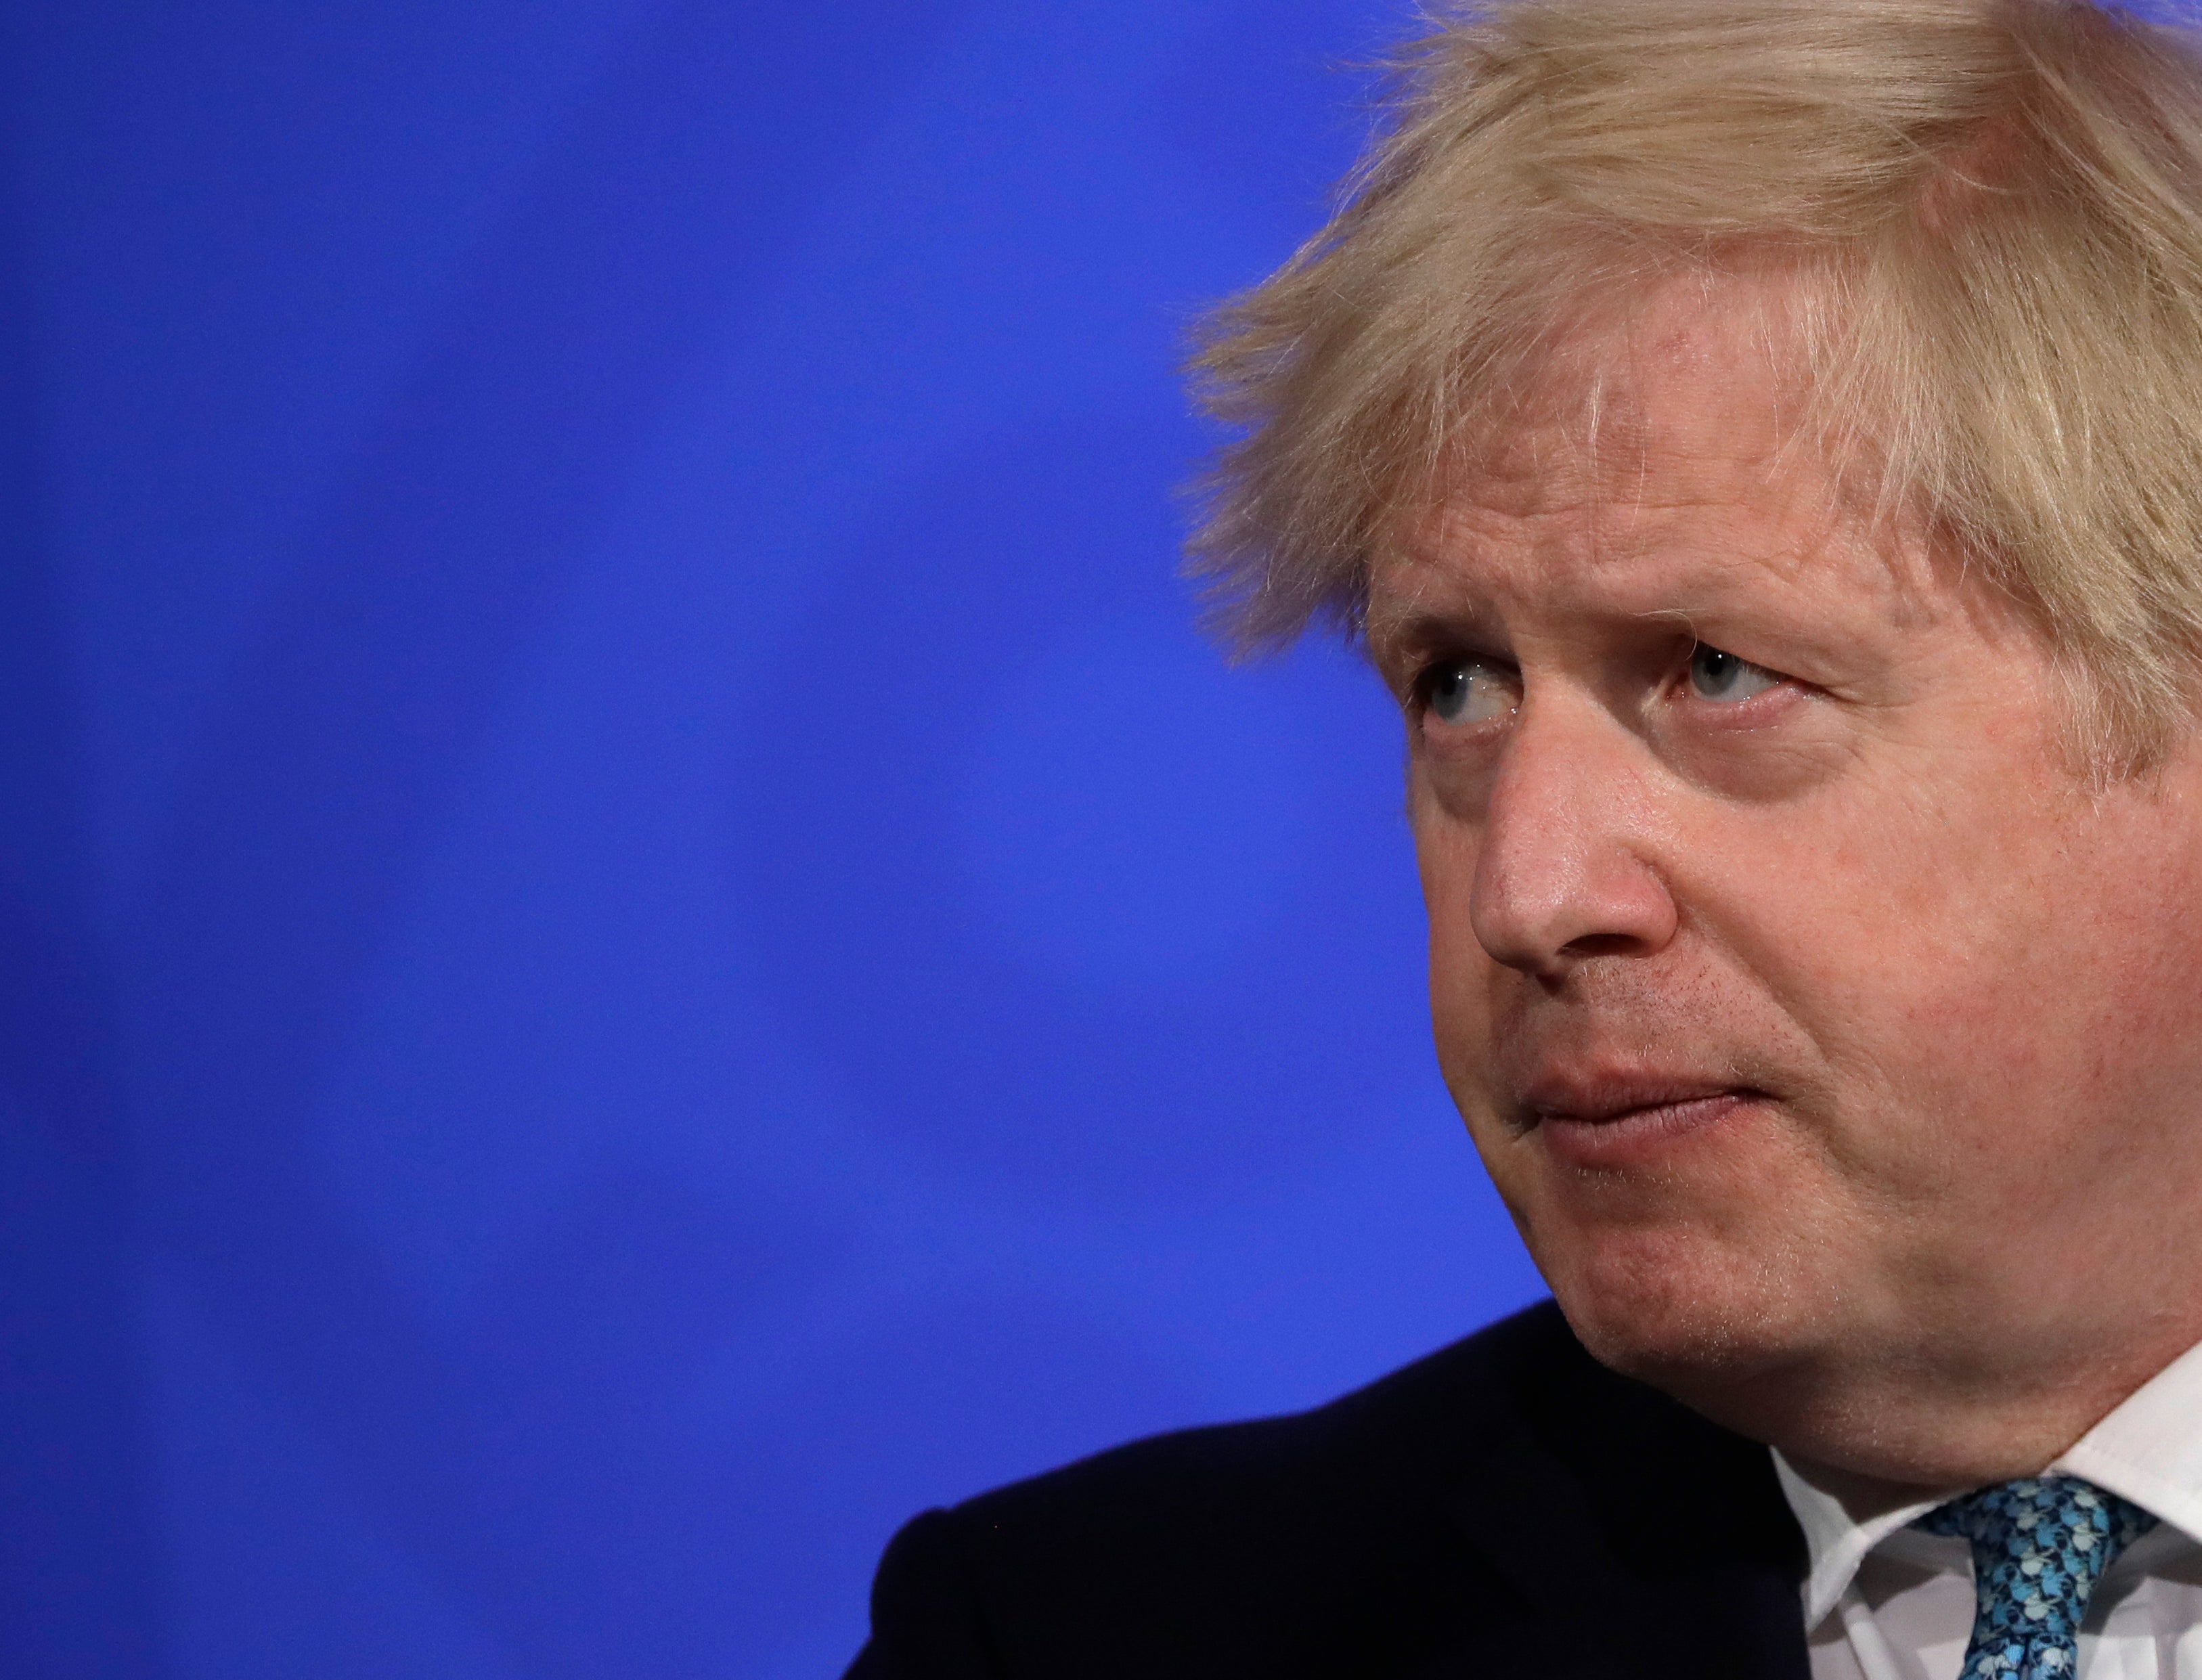 Boris Johnson’s government achieved the UK’s lowest compliance score ever with GRECO